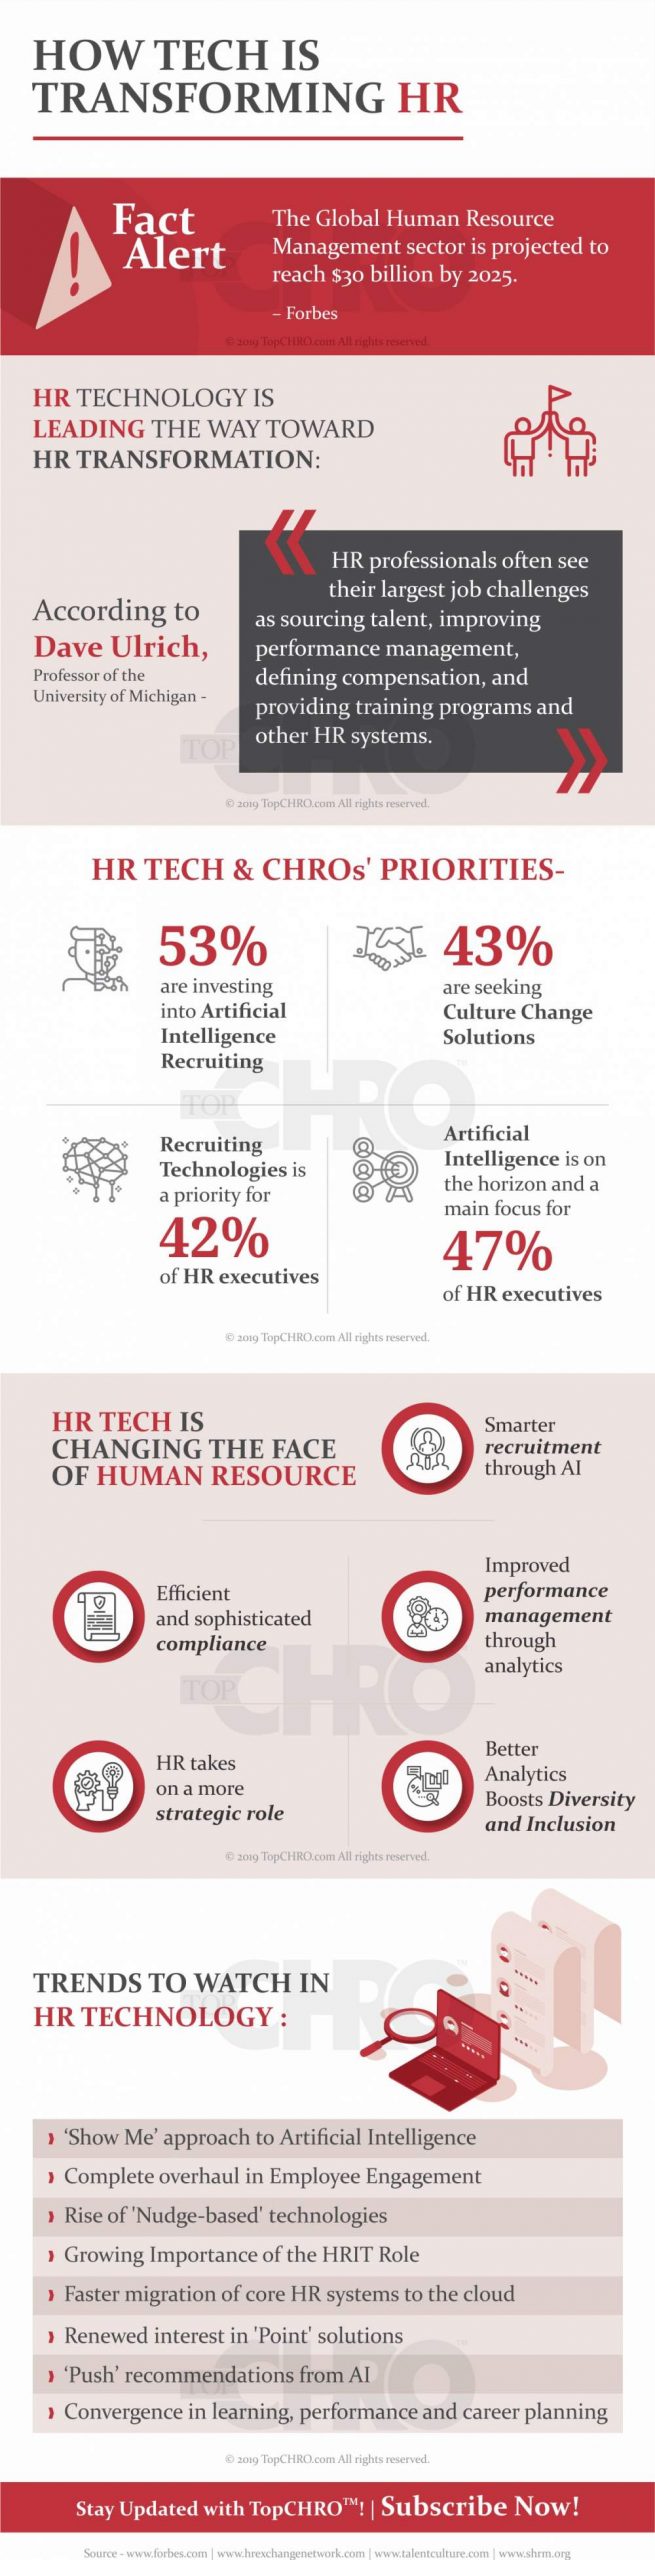 How Tech Is Transforming HR